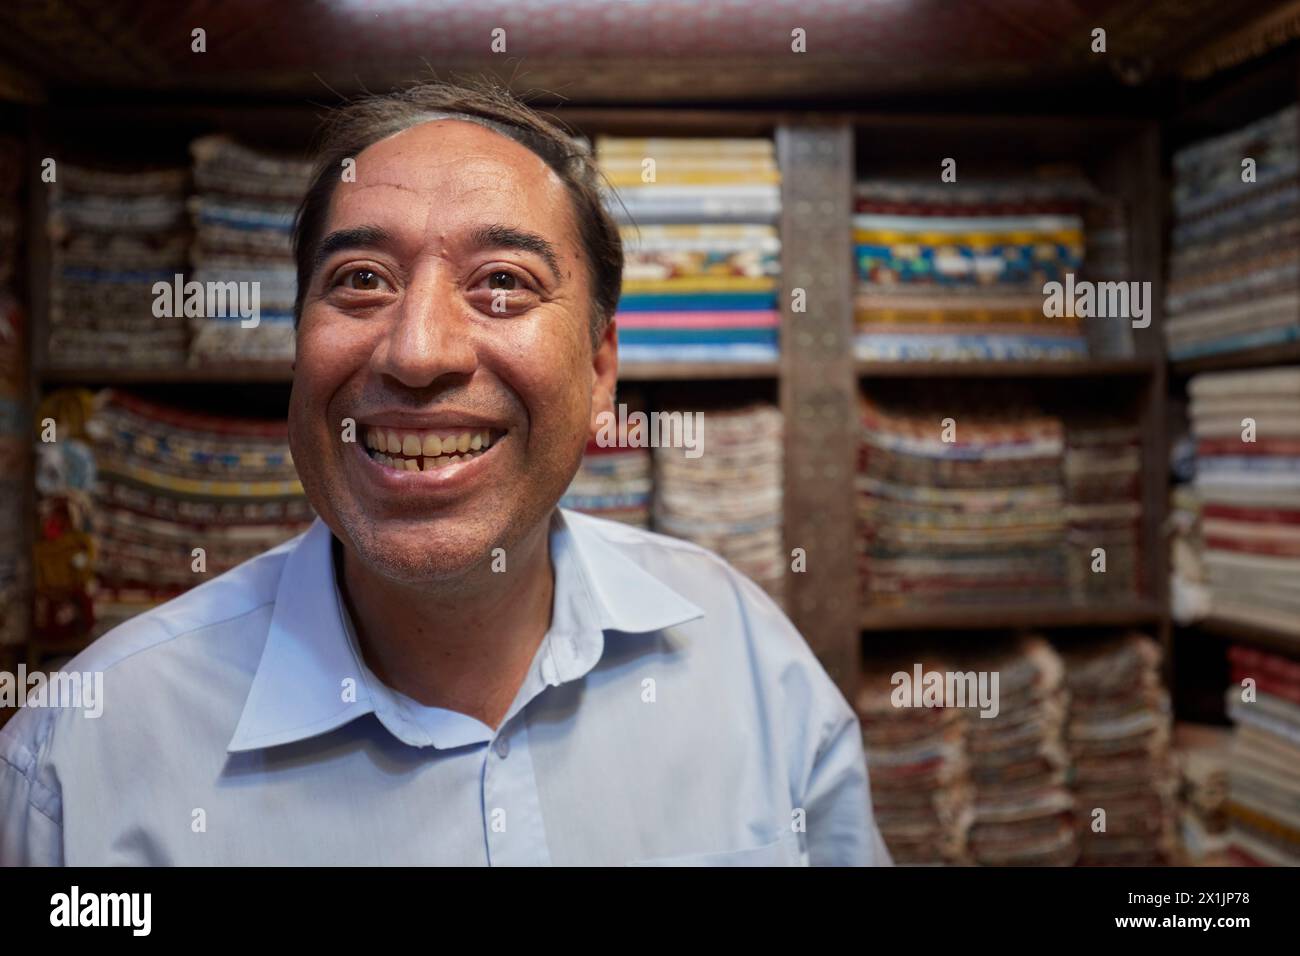 Portrait of a grinning Iranian handicraft seller who looks like once popular French comic actor Fernandel (Fernand Contandin). Isfahan, Iran. Stock Photo